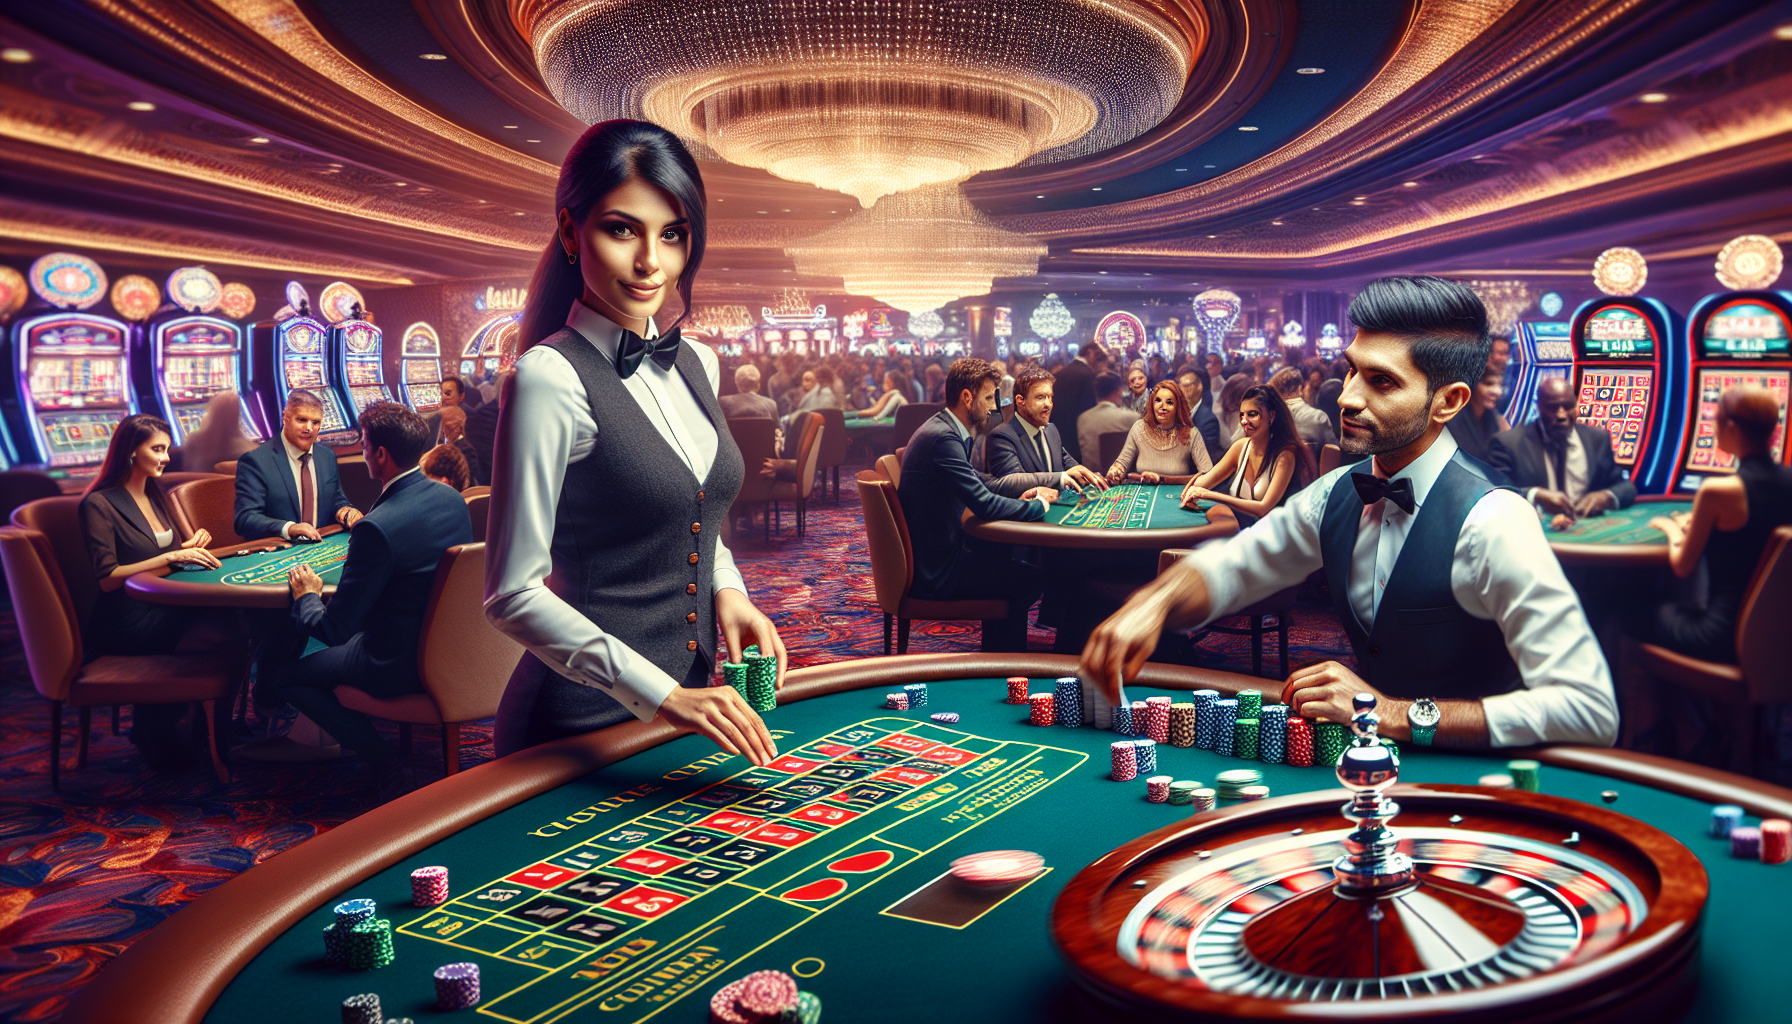 Live casino games with interactive dealers